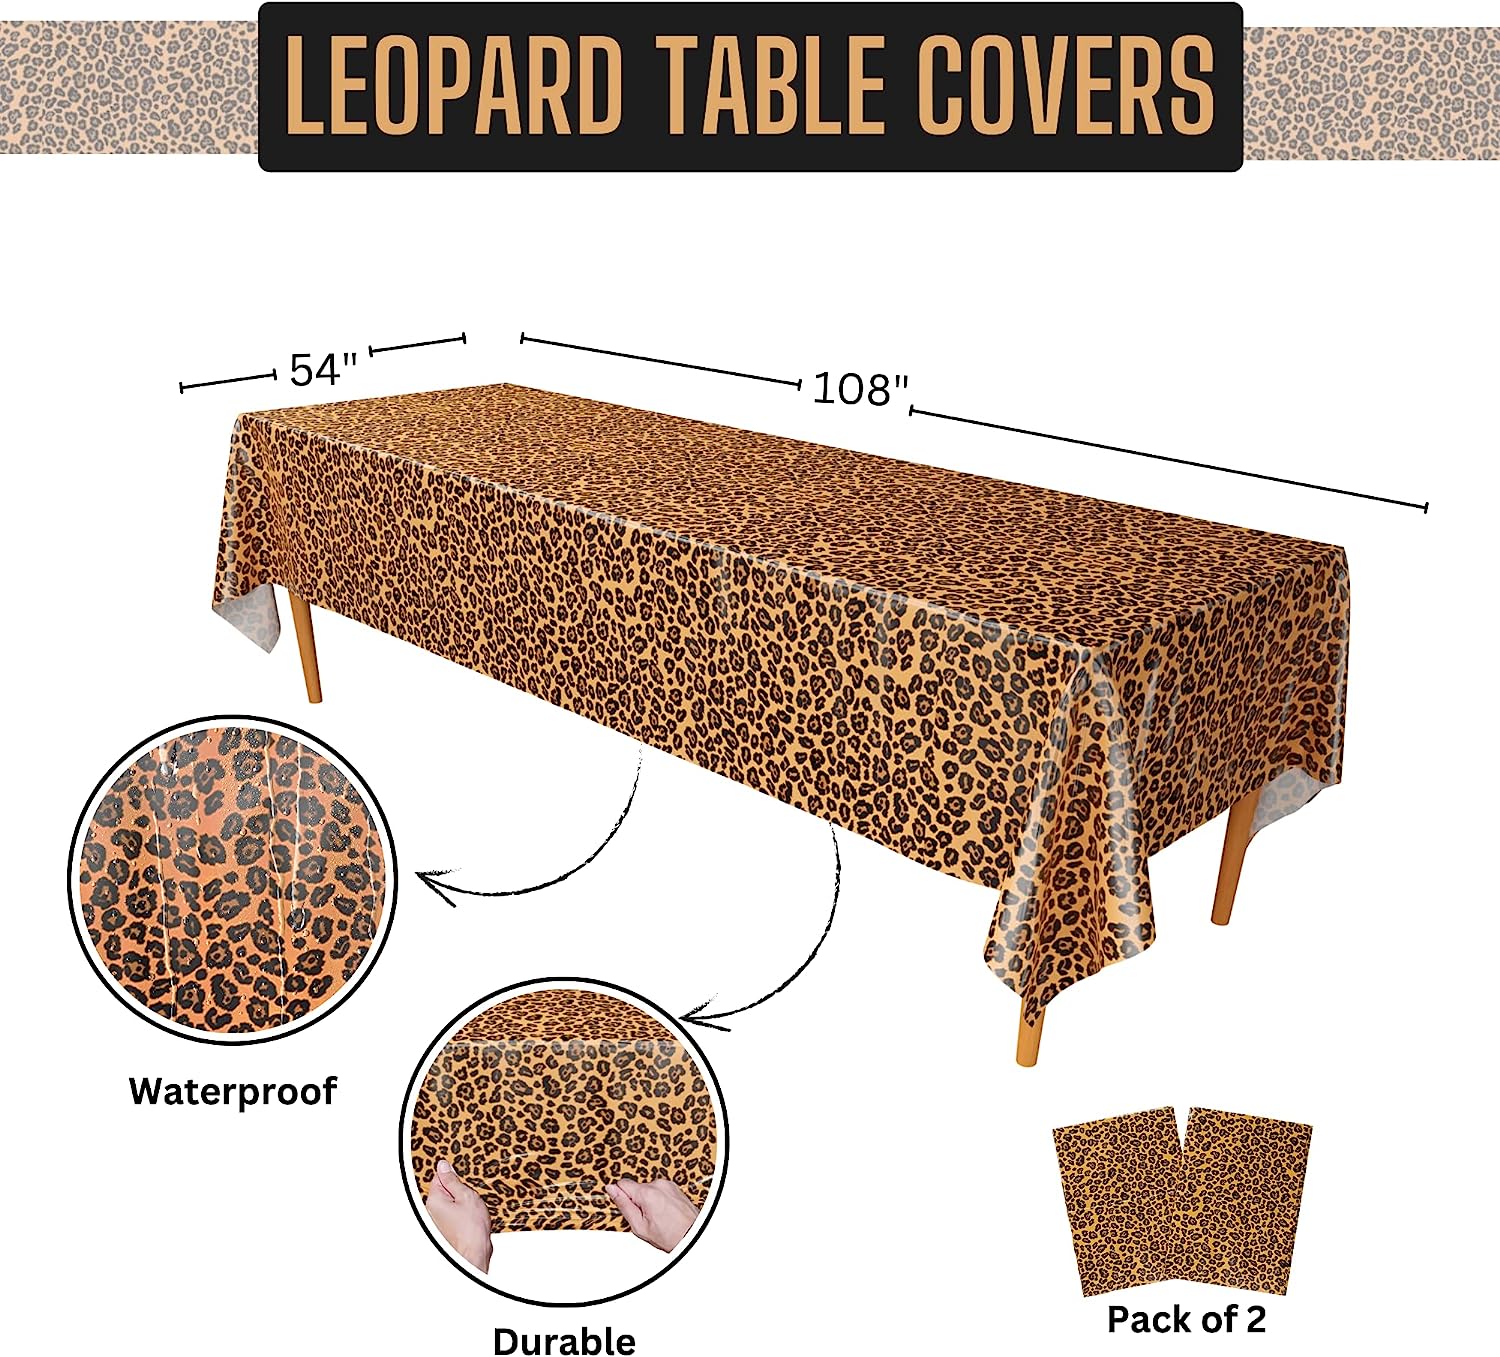 Realistic Leopard Table covers are the perfect addition to your safari, cheetah, jungle animal, or African savanah birthday party or other celebration!